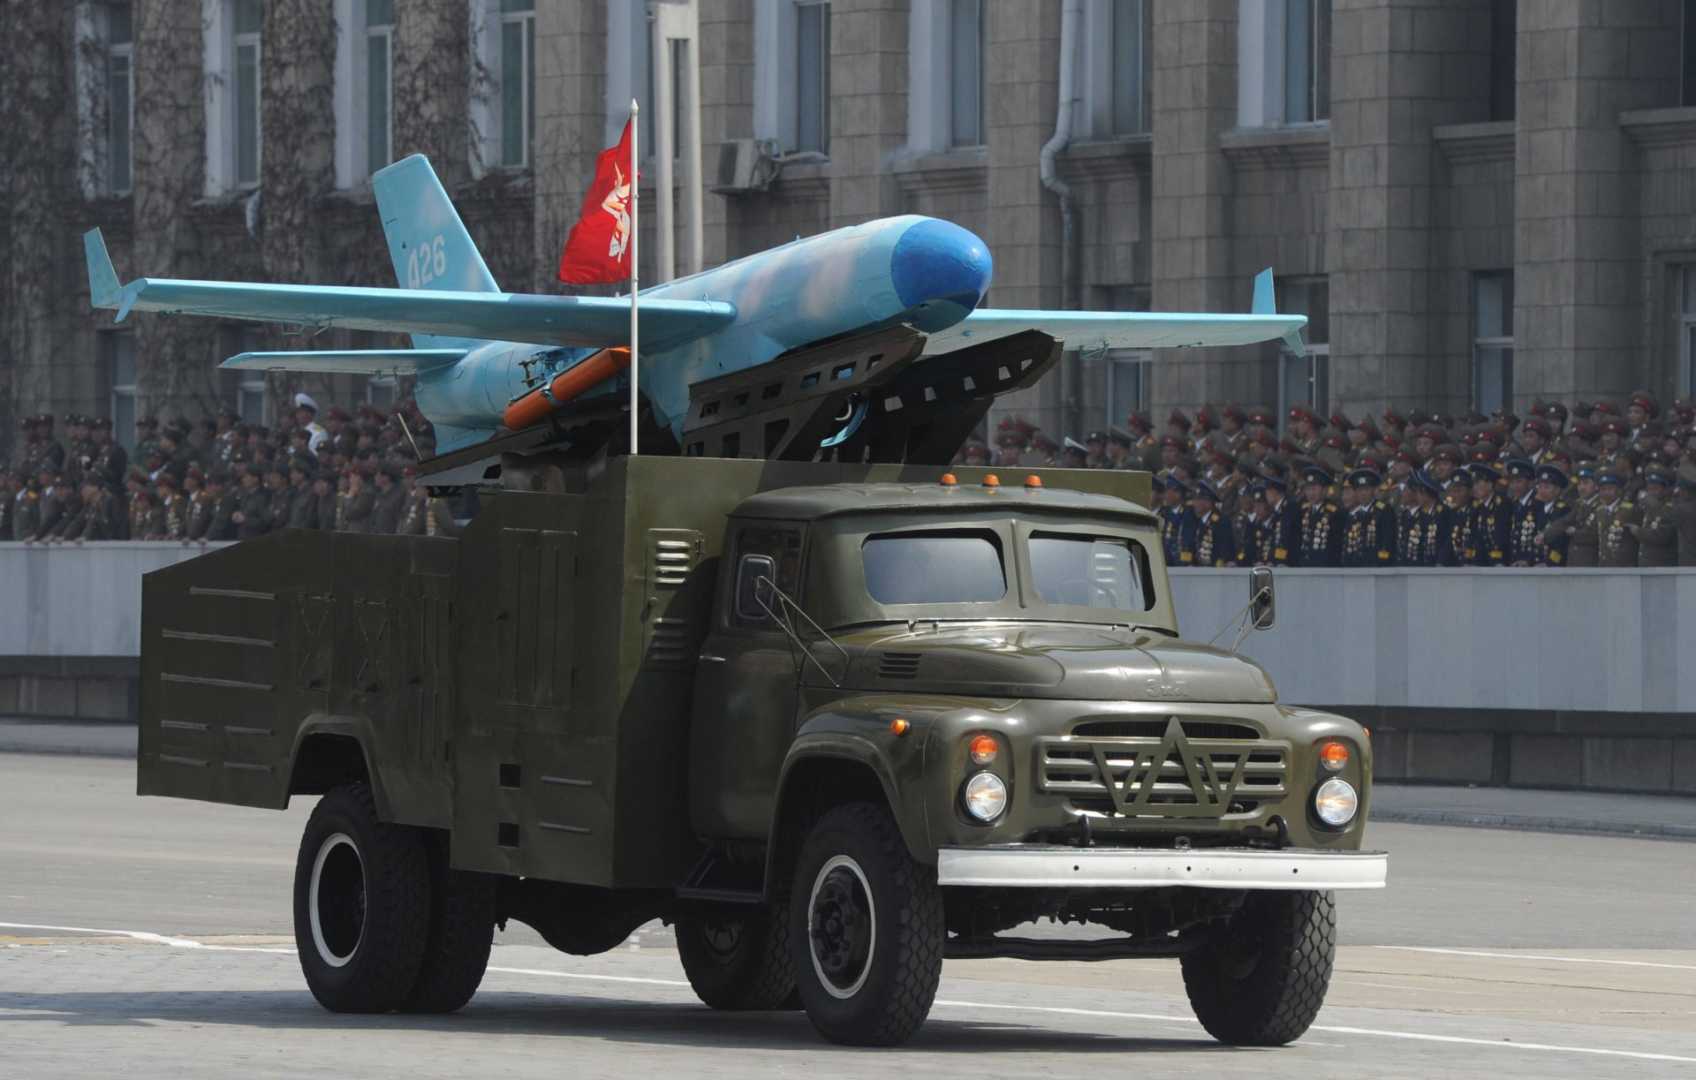 Zil-130 truck carrying a North Korean drone